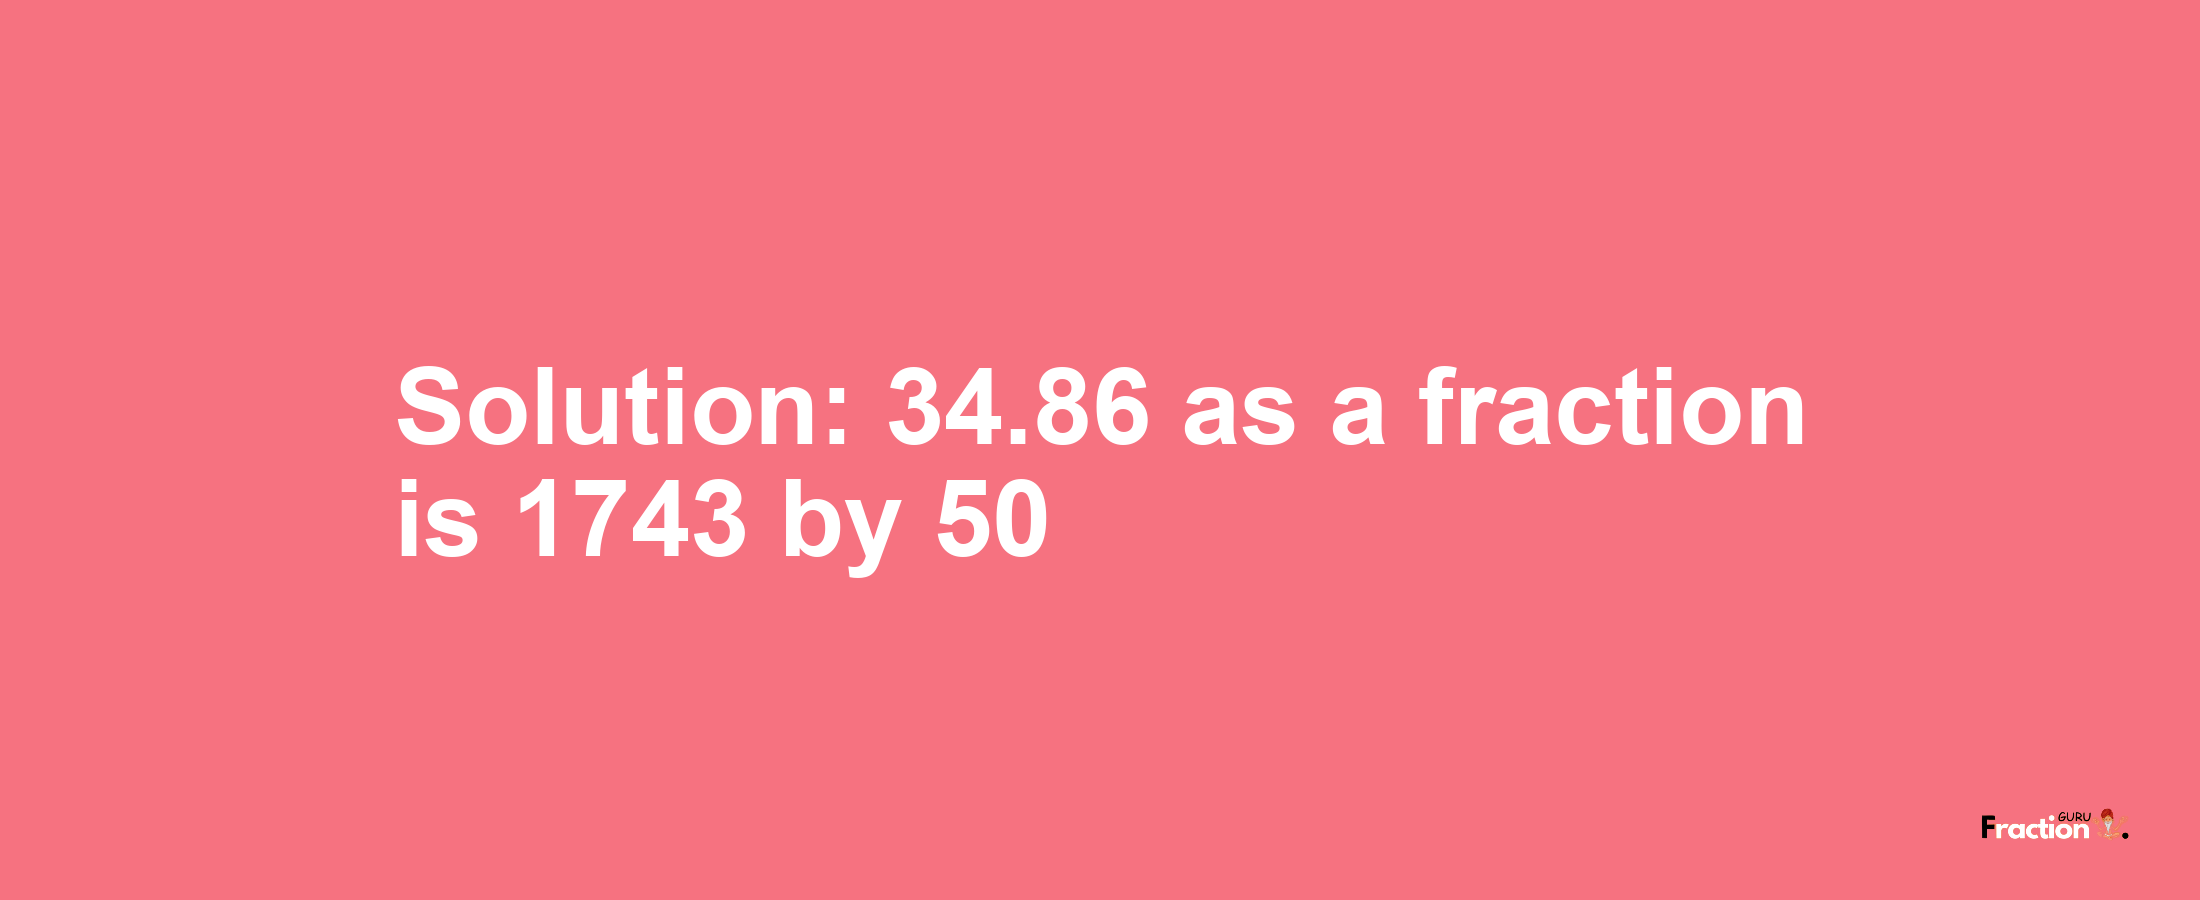 Solution:34.86 as a fraction is 1743/50